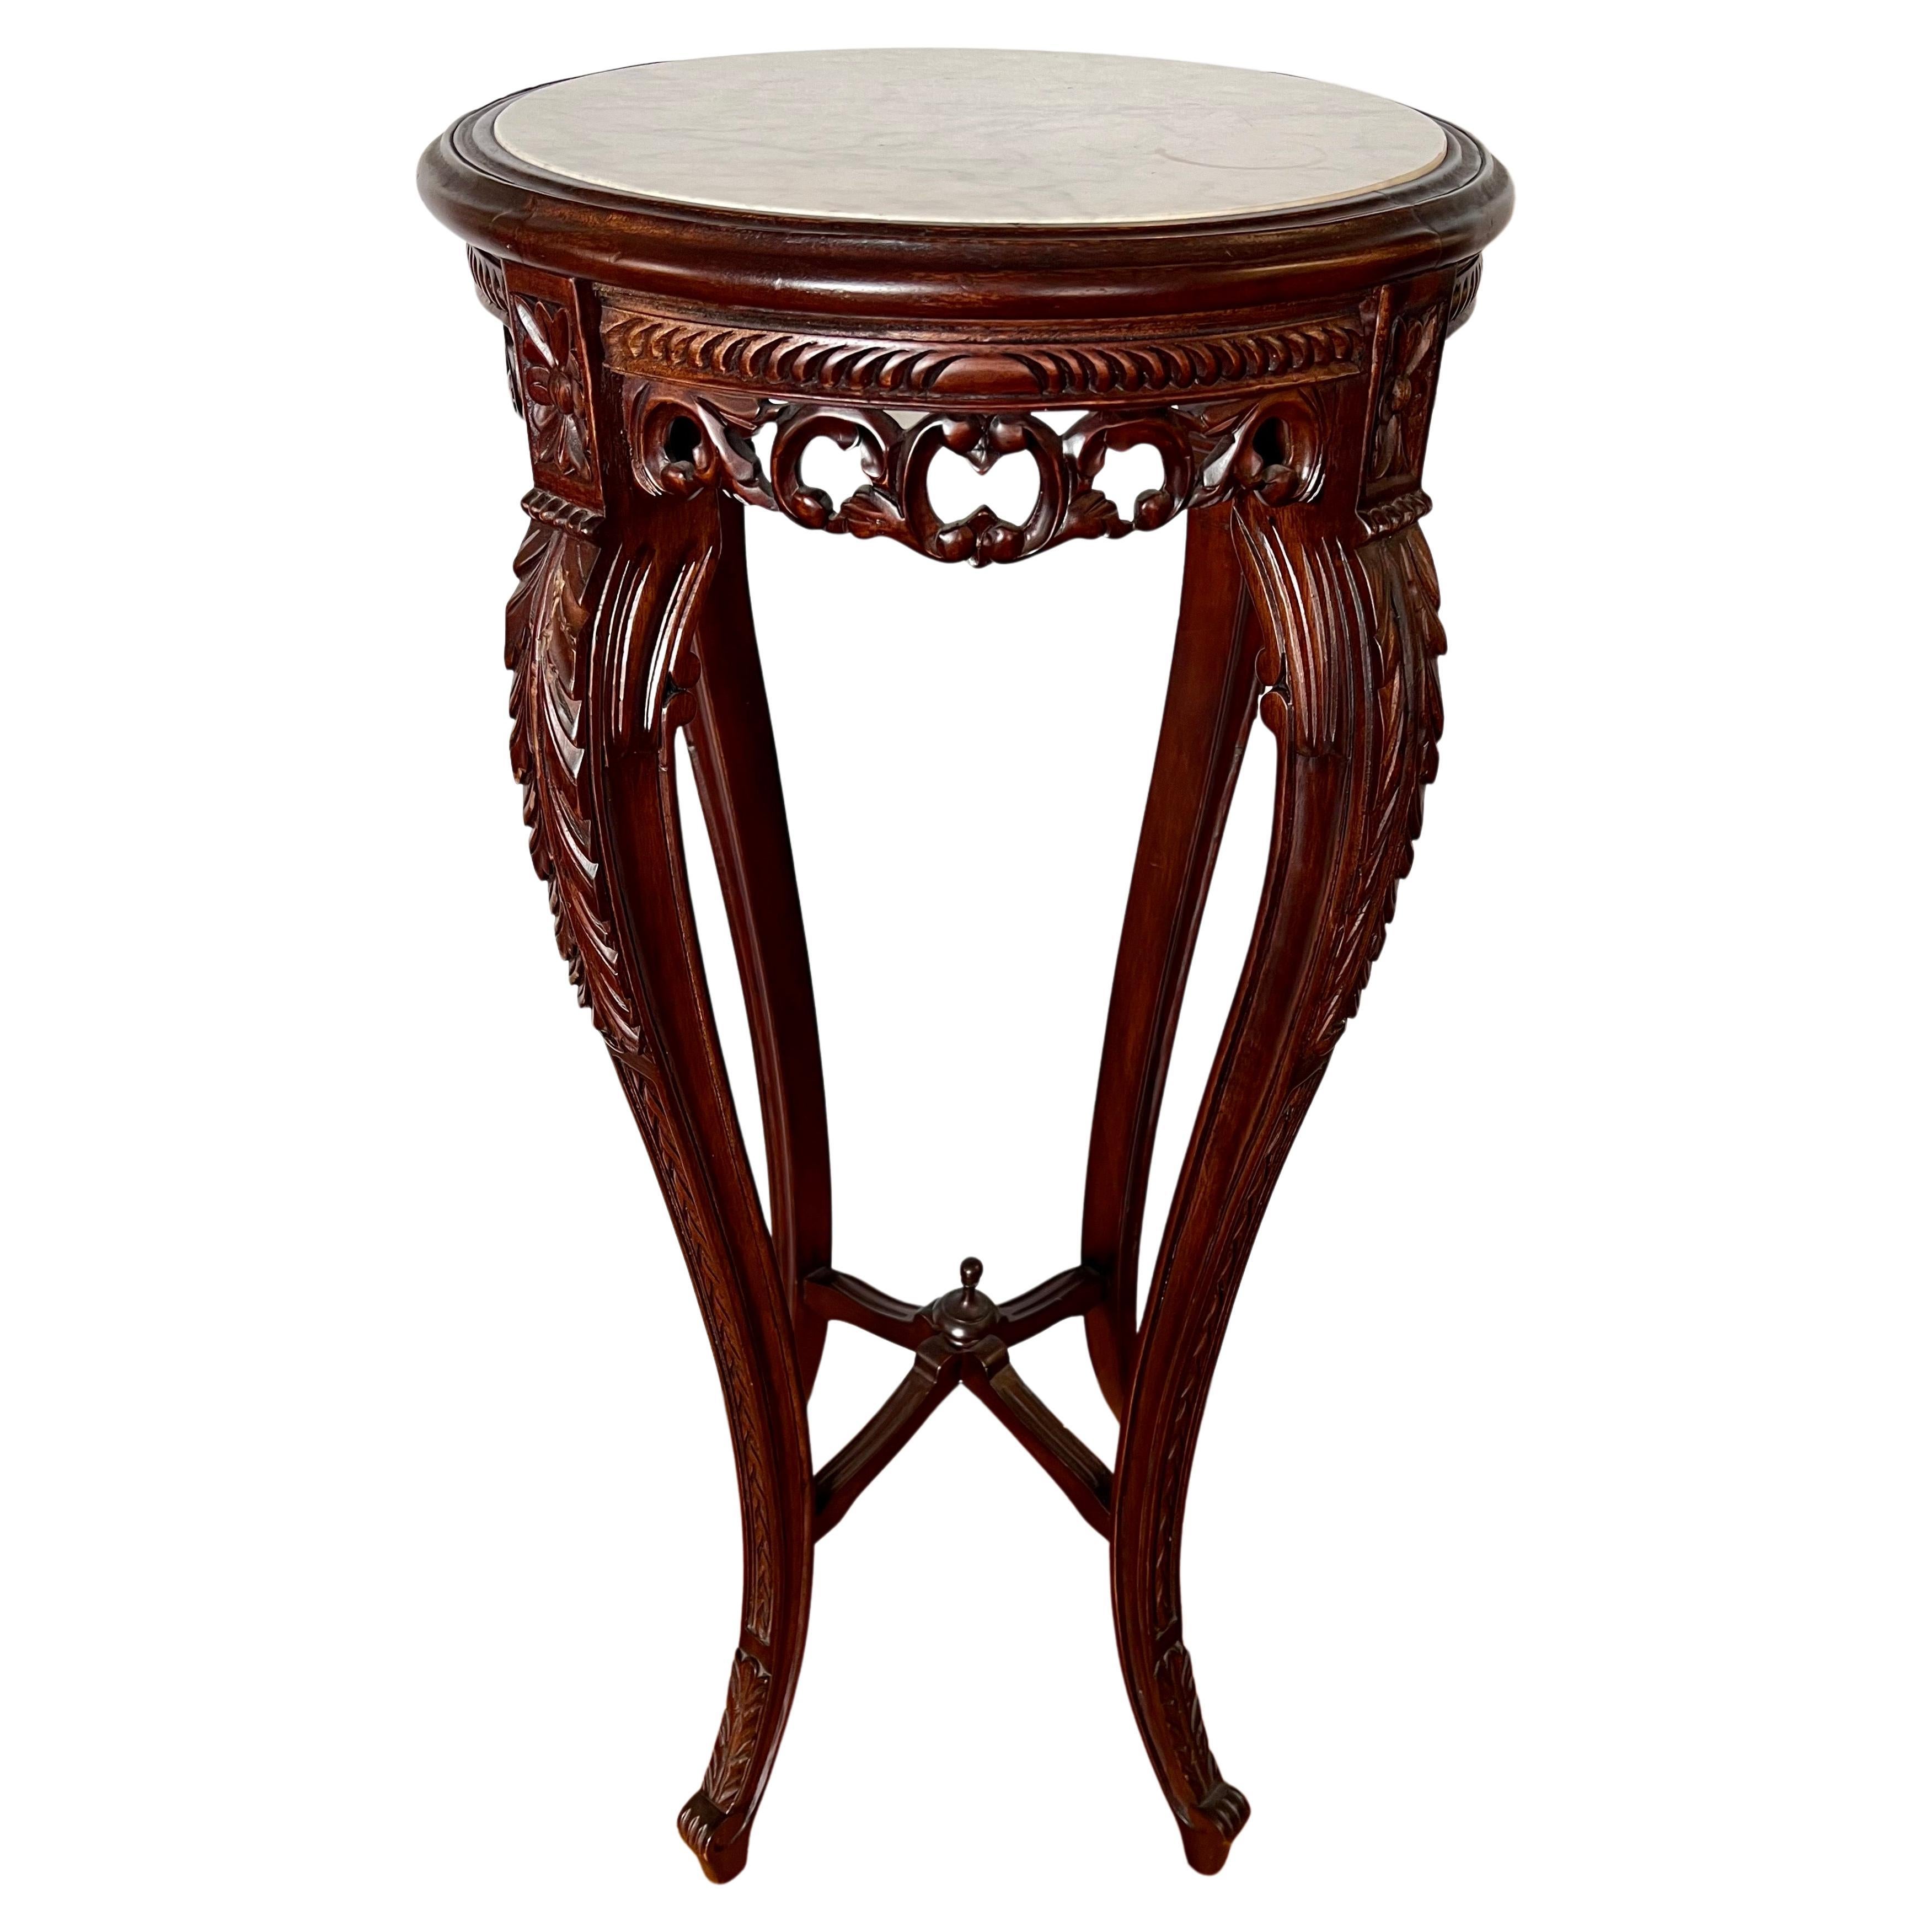 Chinese Carved Rosewood Marble Top Pedestal Table Stand For Sale